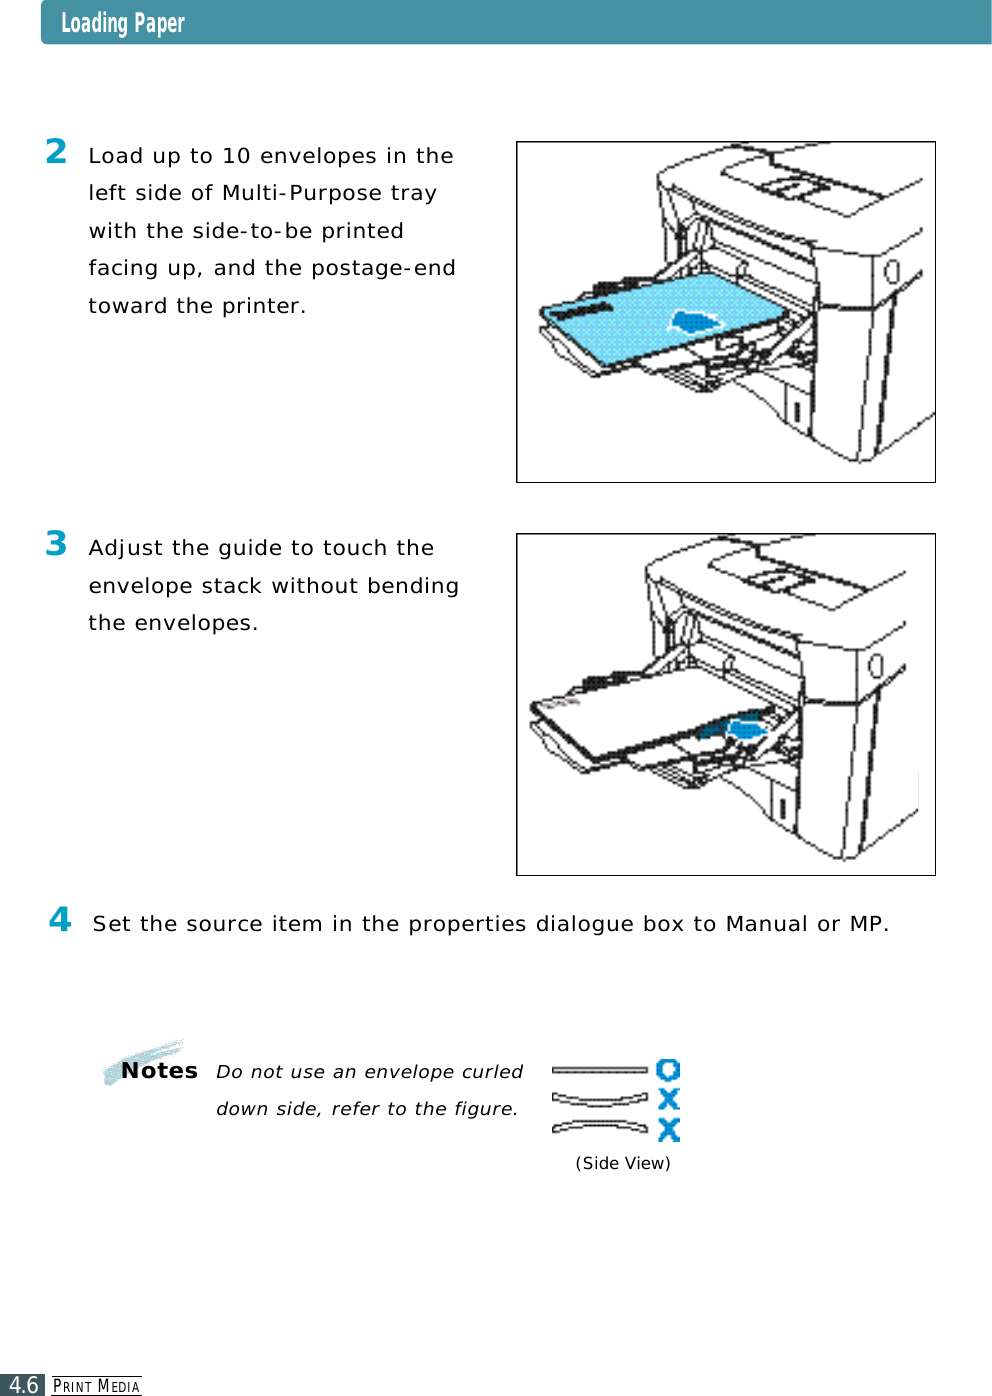 PR I N T ME D I A4.6(Side View)2Load up to 10 envelopes in theleft side of Multi-Purpose traywith the side-to-be printed facing up, and the postage-endt o ward the printer.3Adjust the guide to touch thee nvelope stack without bendingthe enve l o p e s .4Set the source item in the properties dialogue box to Manual or MP.N o t e s Do not use an envelope curled down side, refer to the figure.Loading Paper